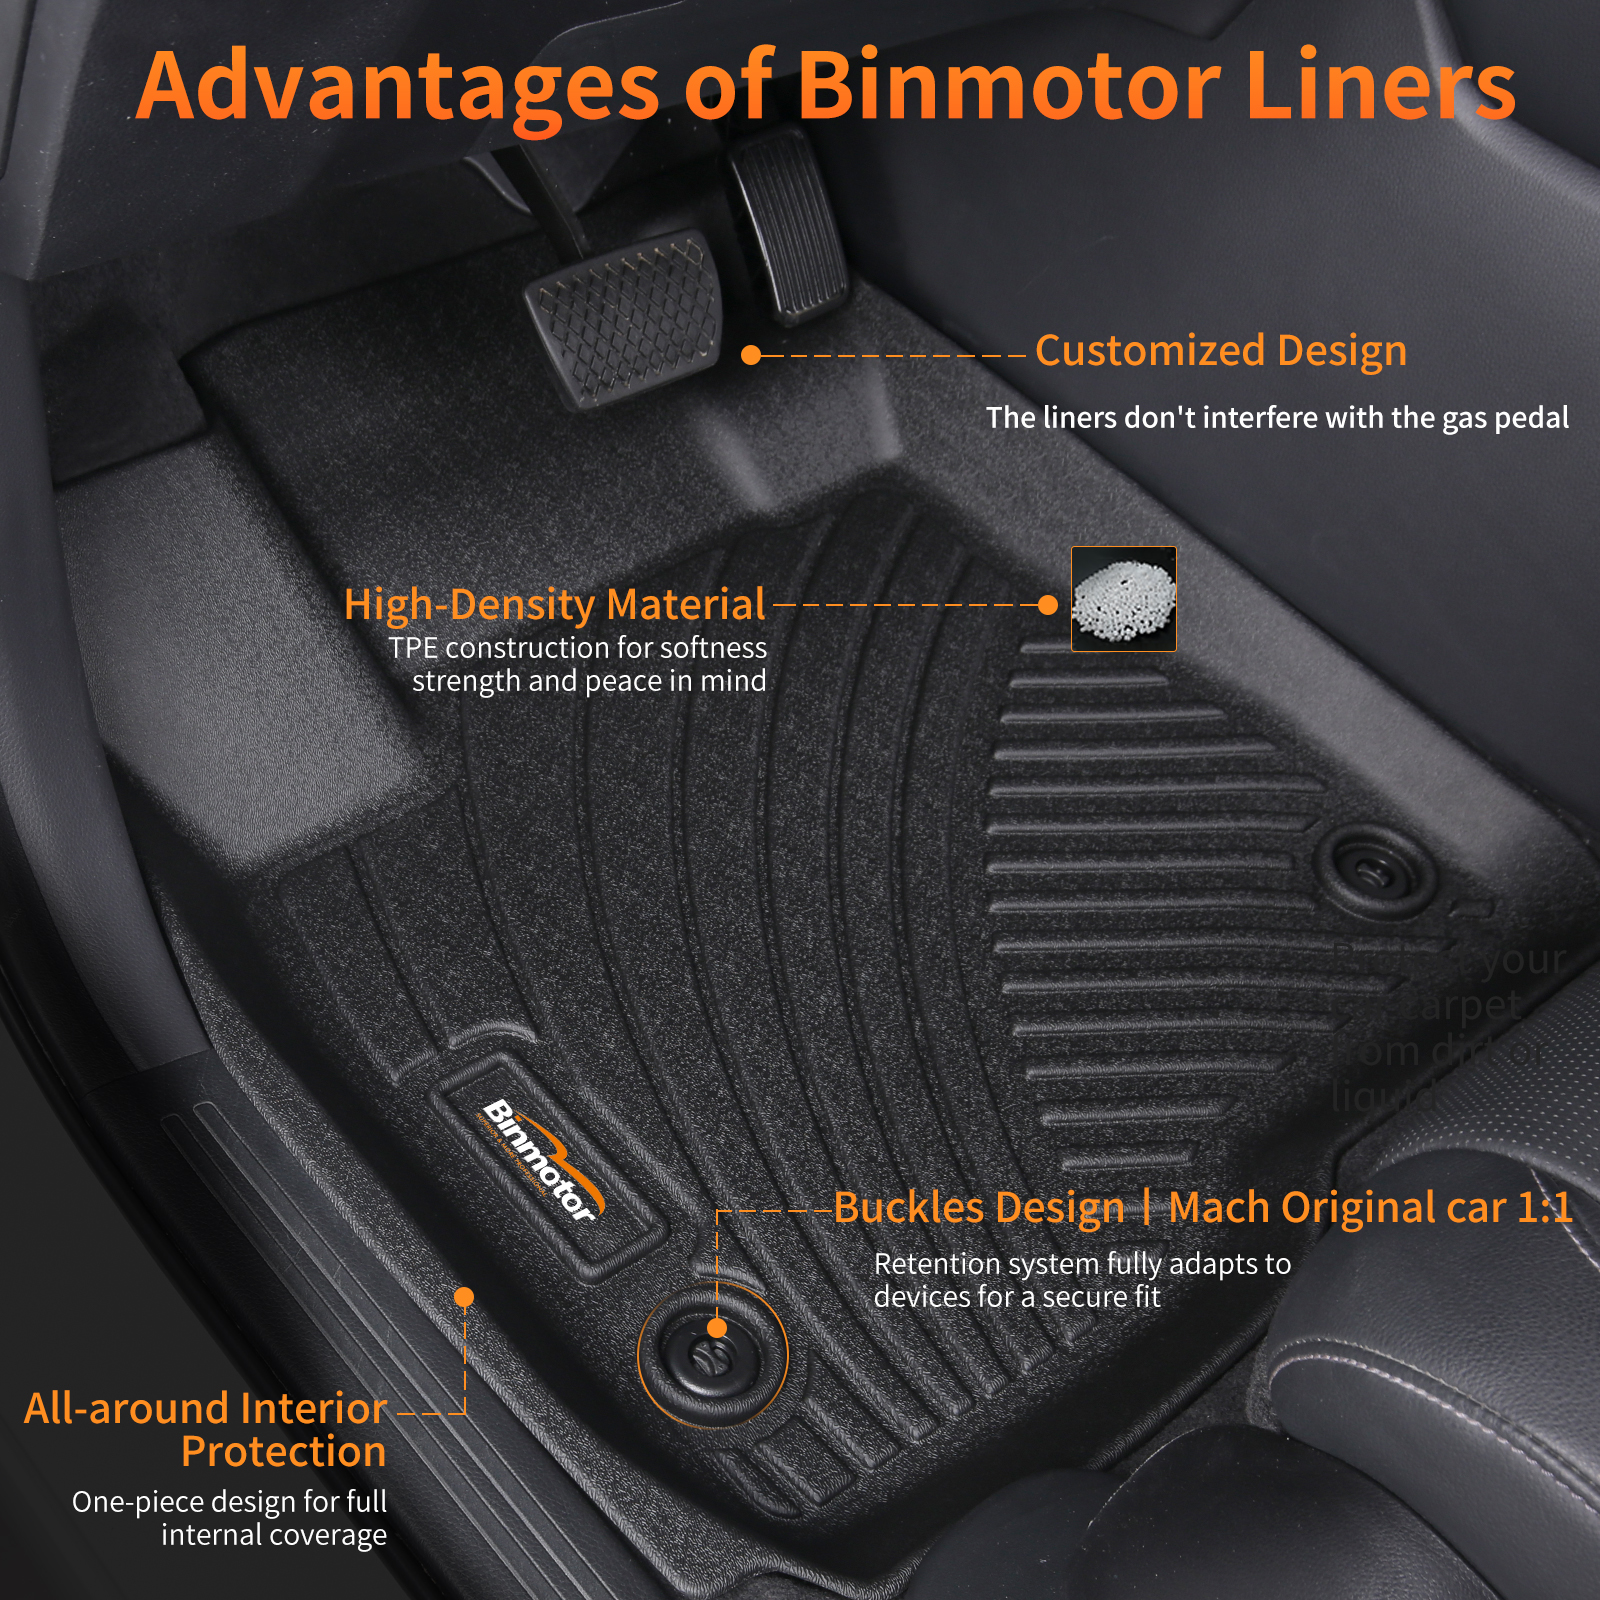 Binmotor-Floor Mats for Chevy/Chevrolet Trax丨TPE Rubber Floor Mat Chevy Trax丨All Weather Car Floor Mats for Trax丨Chevrolet Trax Accessories（compatible year 2023-2024）